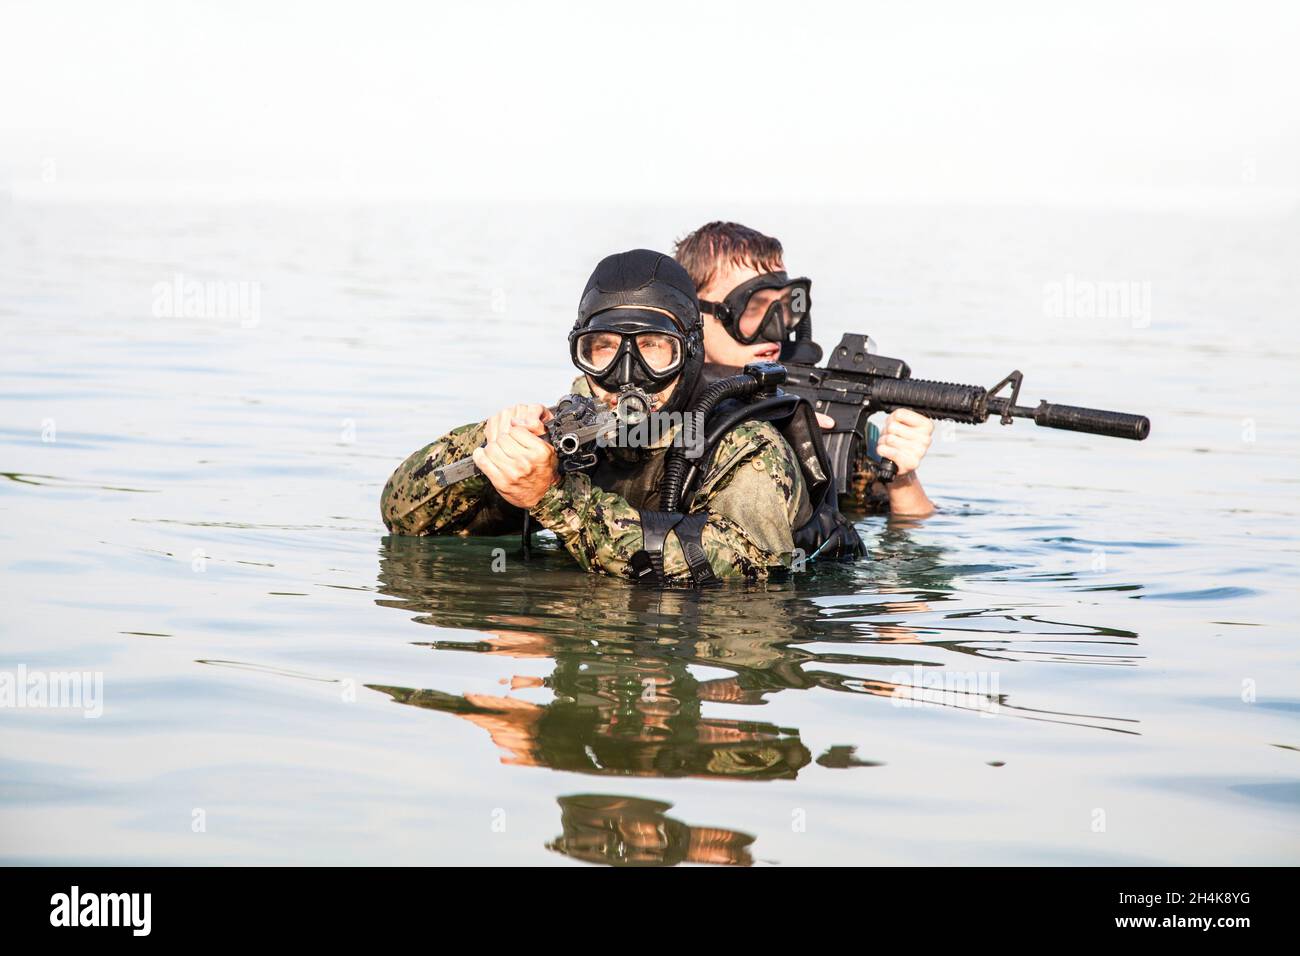 Navy SEAL frogmen with complete diving gear and weapons in the water. Stock Photo